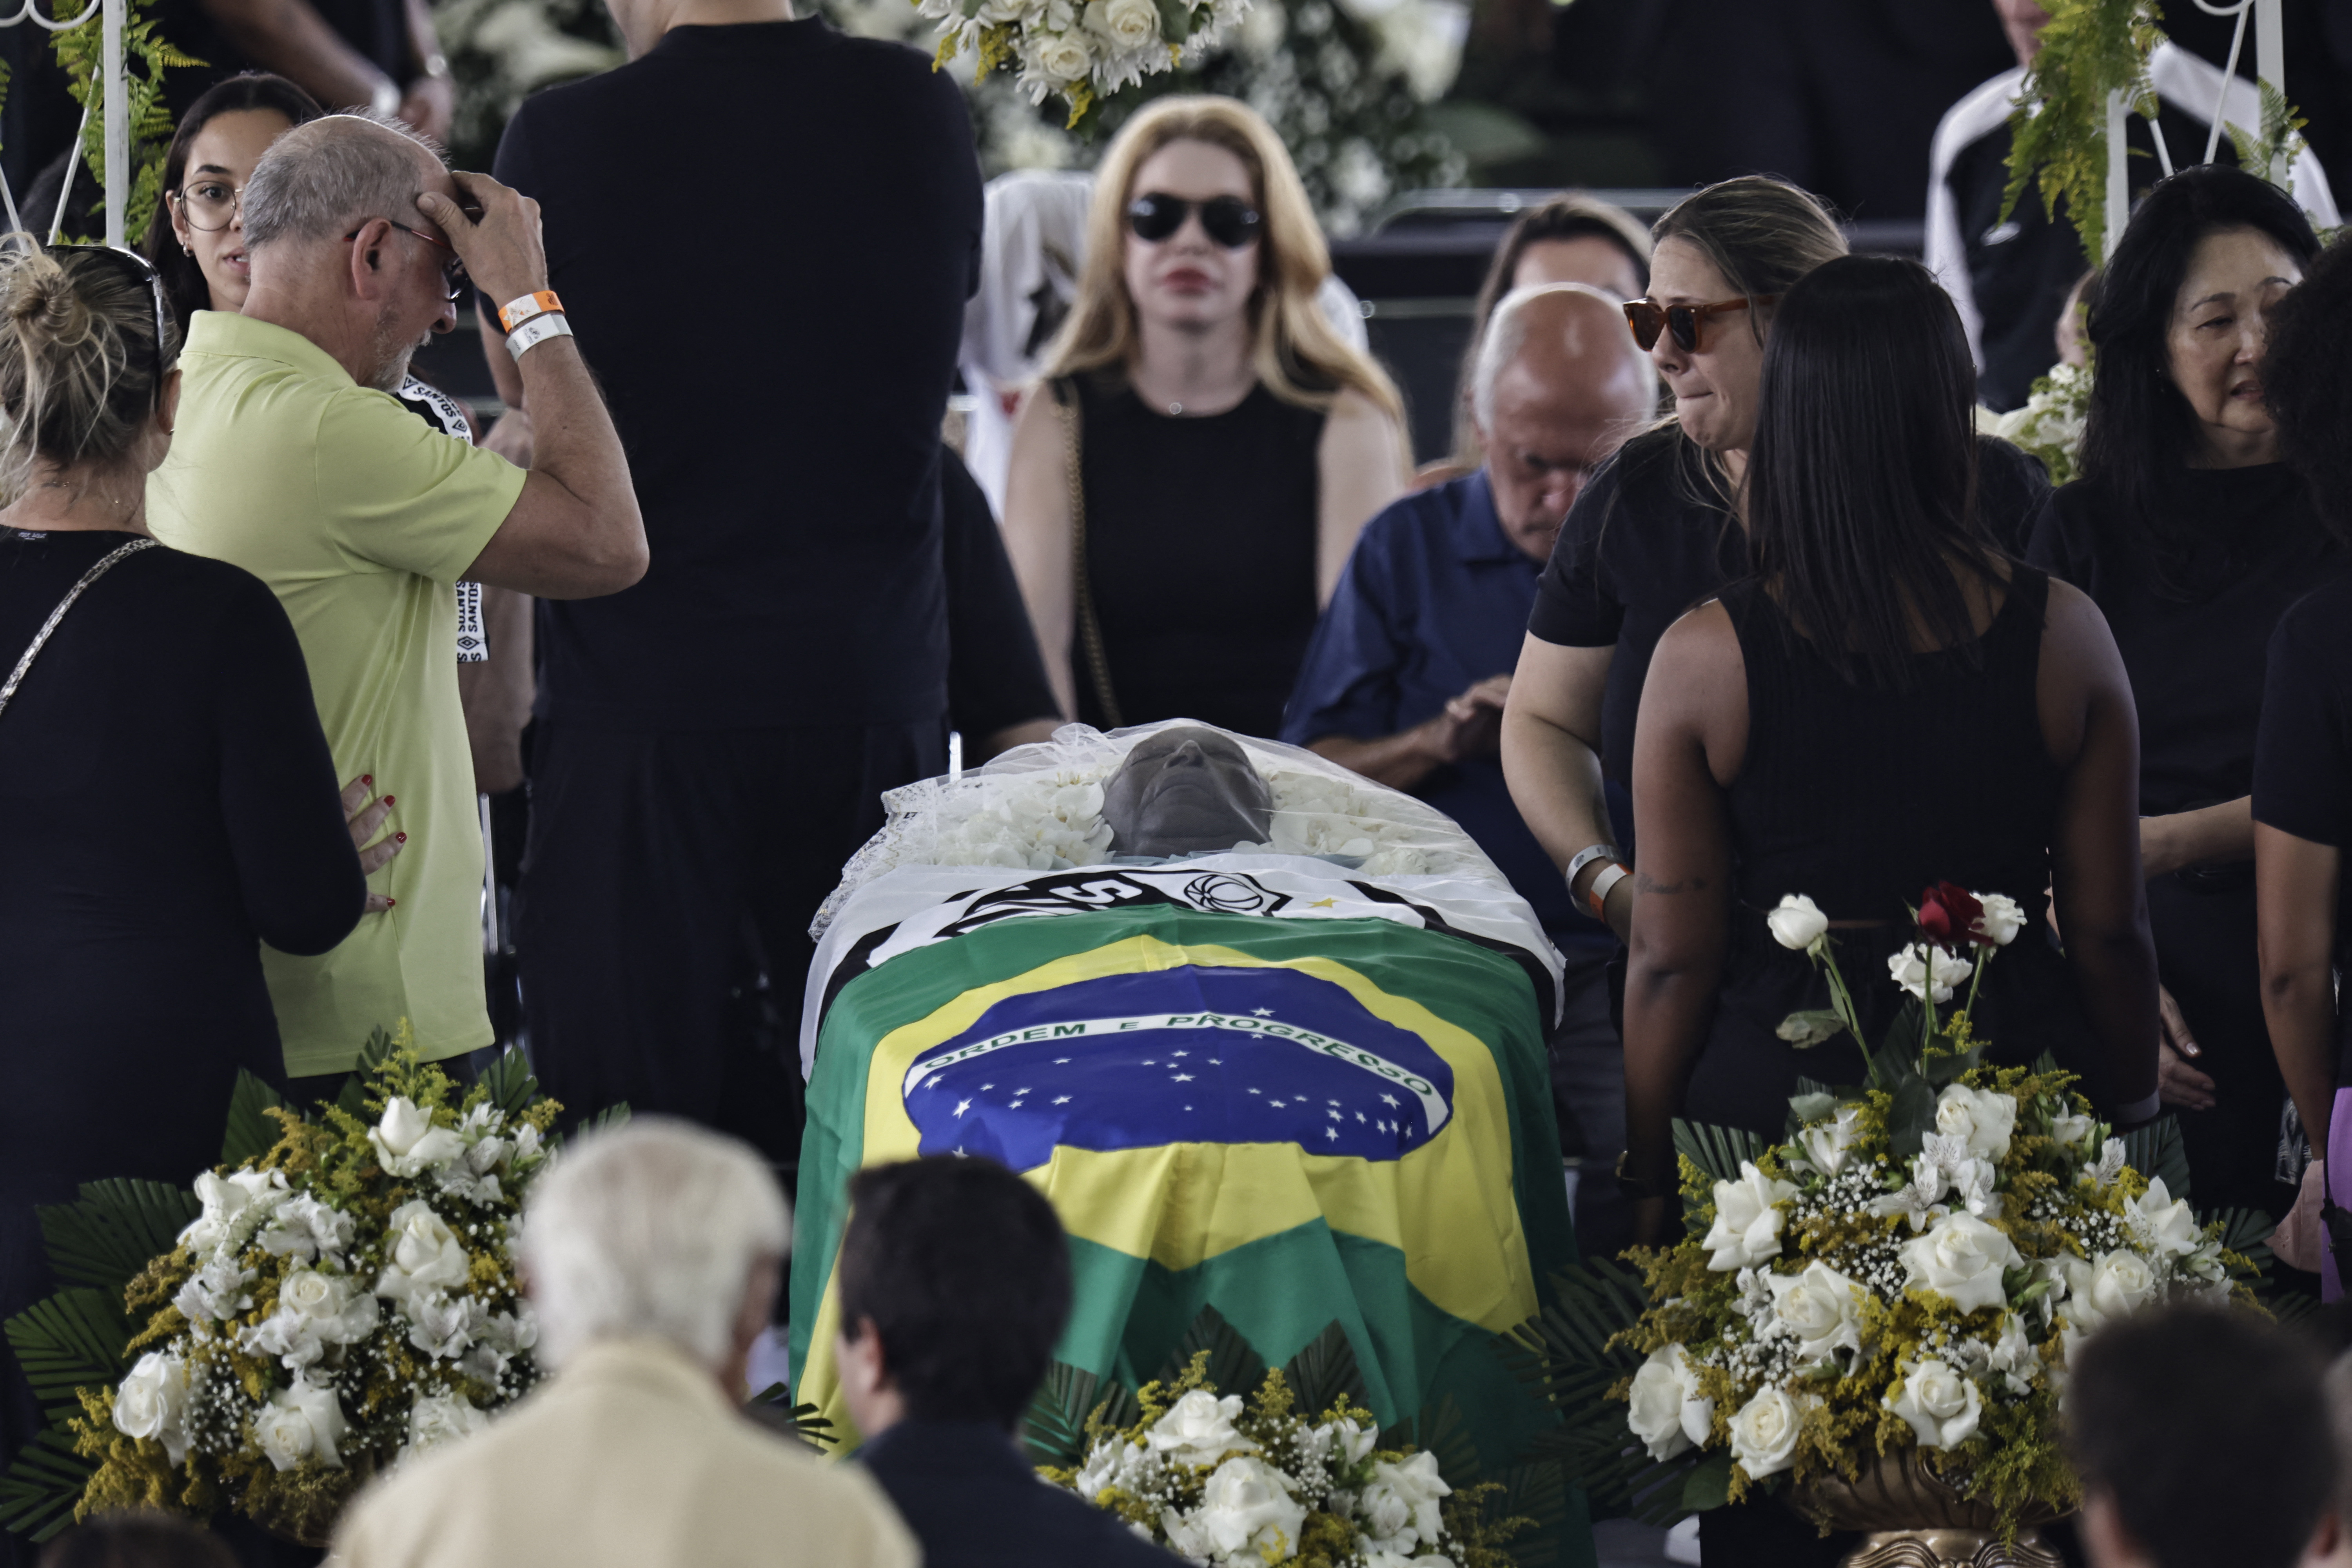 Soccer Football - Death of Brazilian soccer legend Pele - Vila Belmiro Stadium, Santos, Brazil - January 2, 2023 SENSITIVE MATERIAL. THIS IMAGE MAY OFFEND OR DISTURB Brazilian soccer legend Pele is seen in his casket, on the pitch of his former club Santos' Vila Belmiro stadium as mourners look on while he lays in state REUTERS/Ueslei Marcelino